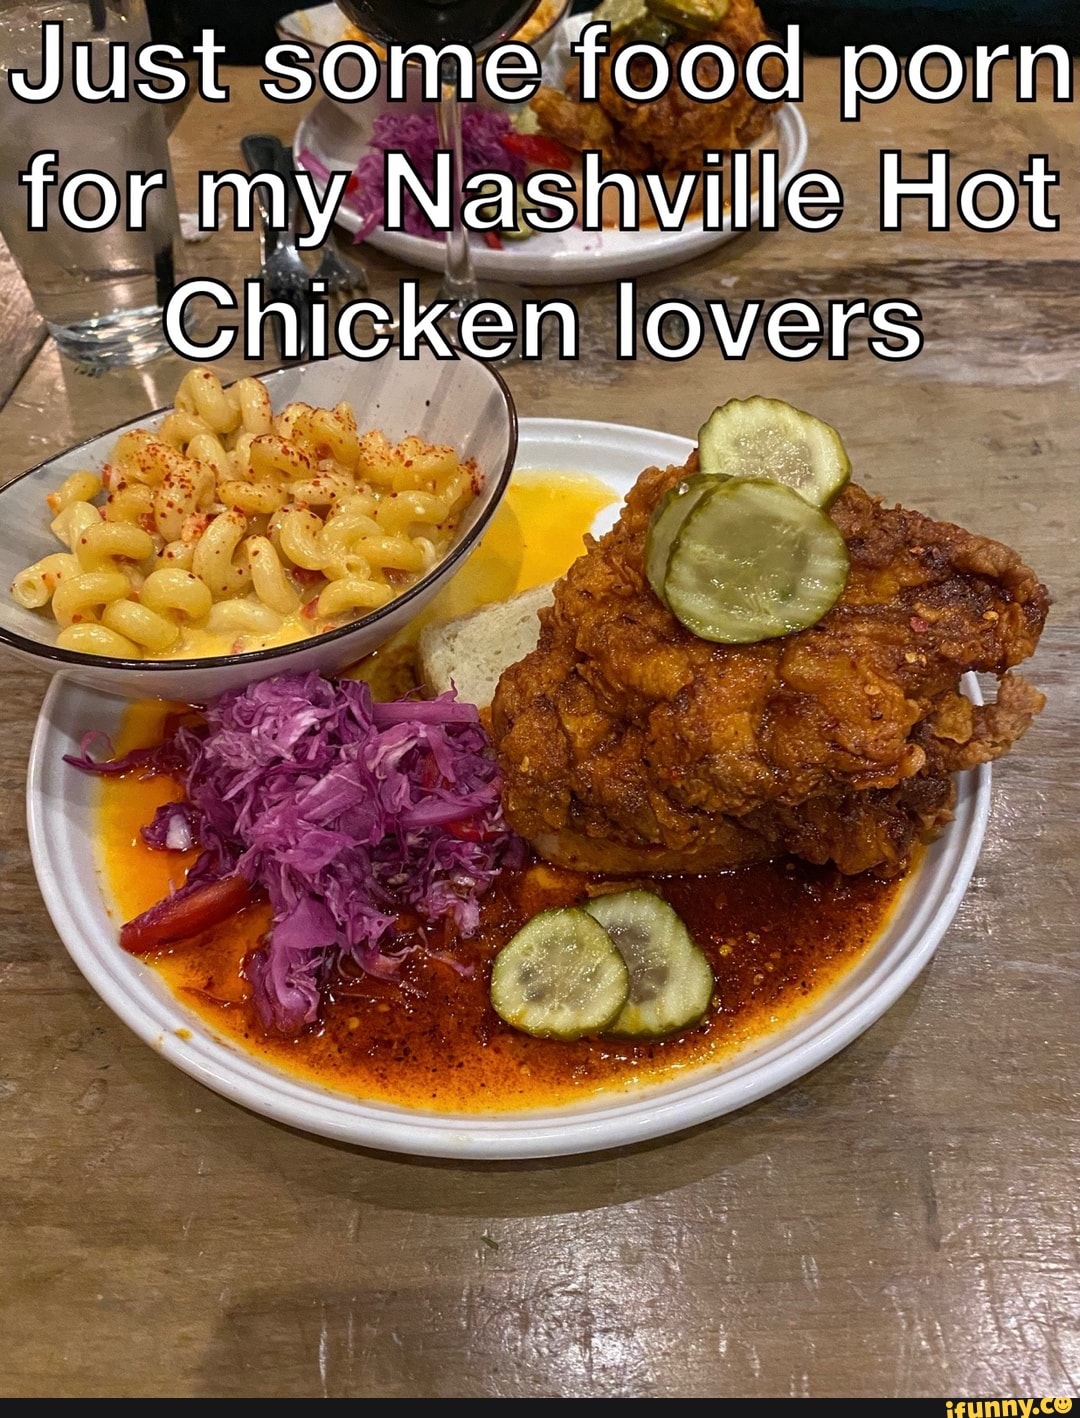 Hot Chicken Porn - Just some food porn for my Nashville Hot -<Chicken lovers - iFunny